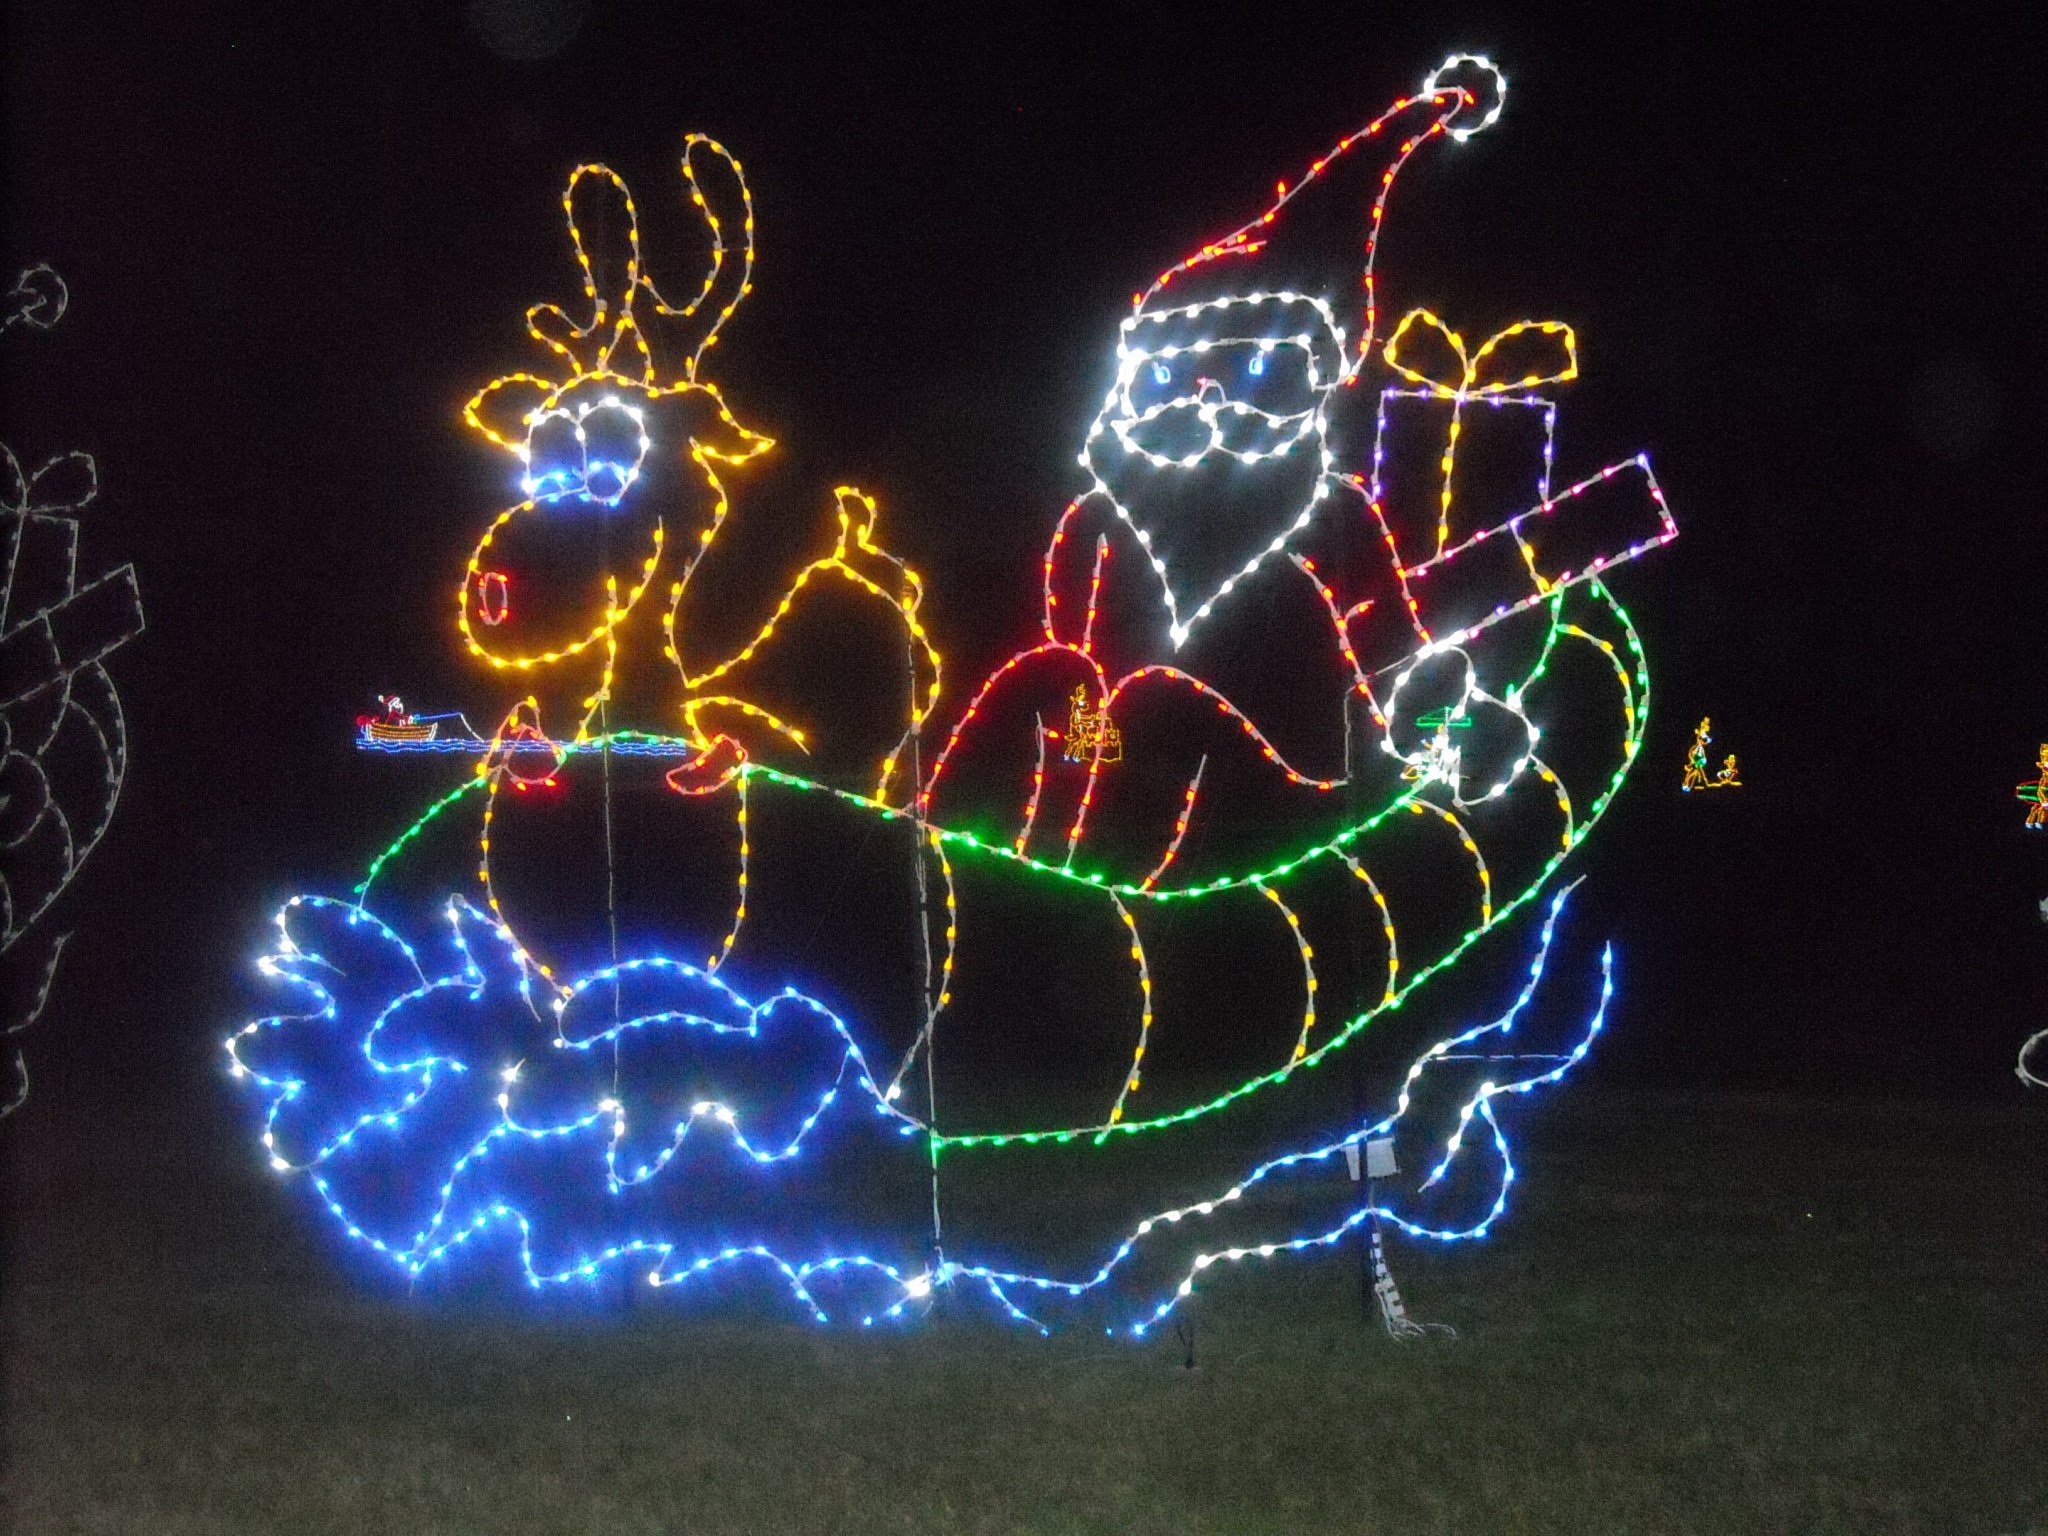 BLORA Lights: a Christmas lights display in Central Texas